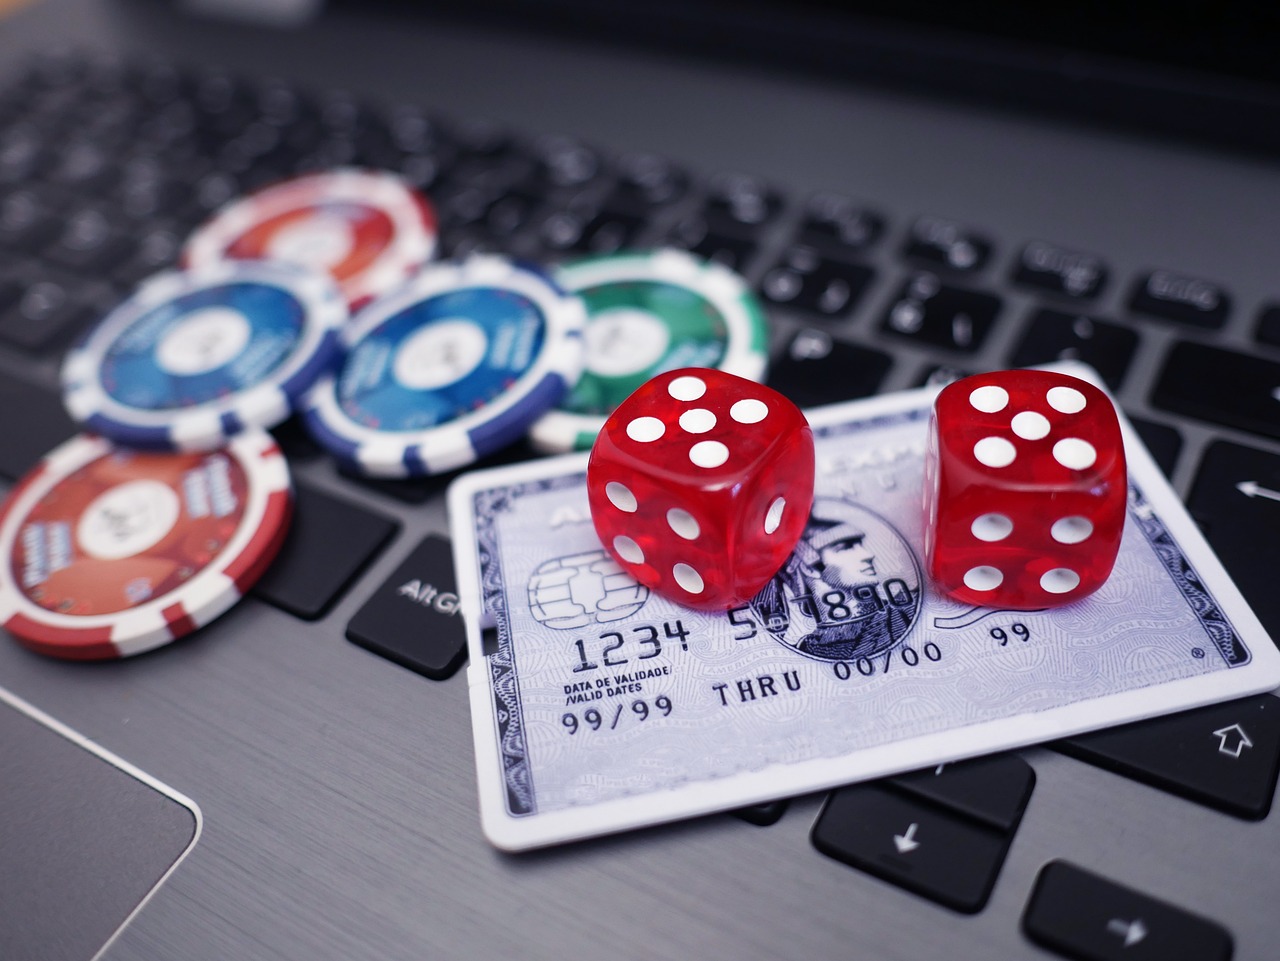 Craps Betting Systems: Do They Work or Are They Just a Gambler’s Fallacy?